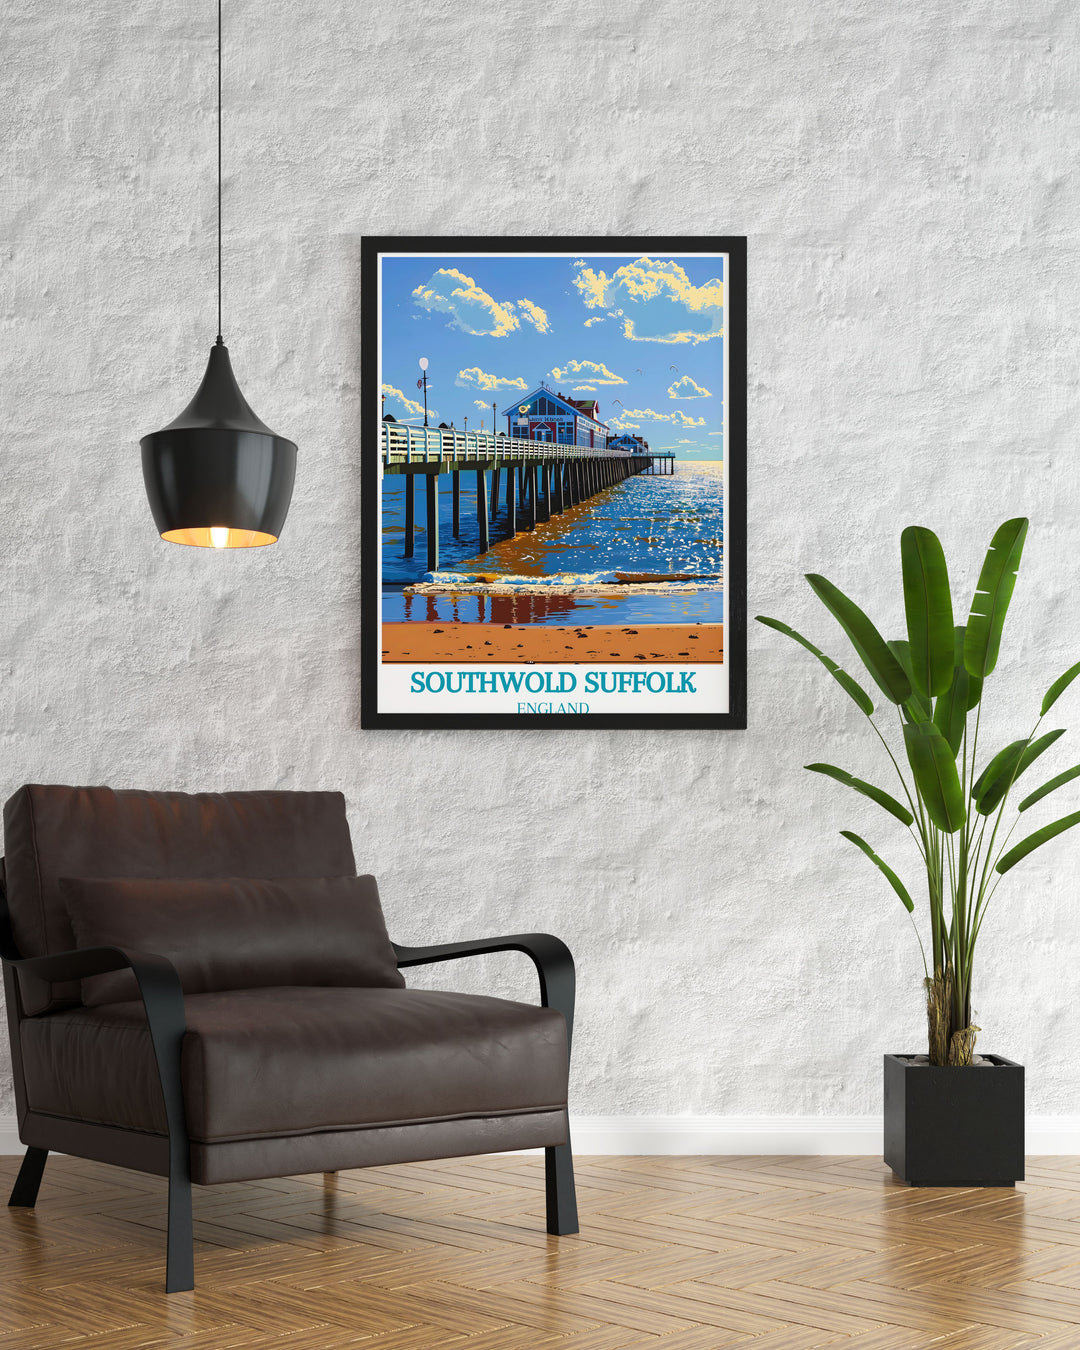 Explore the historical significance of Southwold with this detailed art print, showcasing landmarks like the Southwold Lighthouse and the iconic pier.